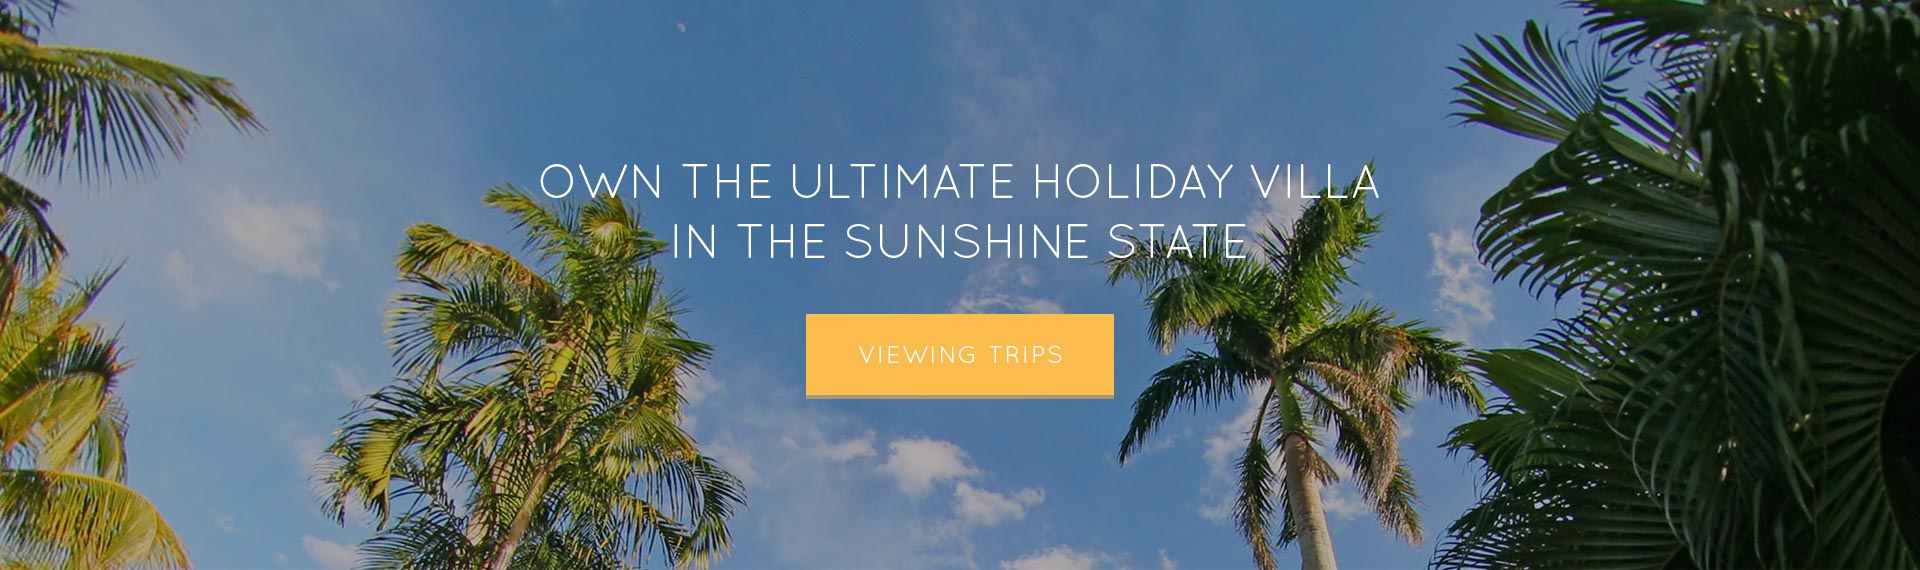 Own the ultimate holiday villa in the sunshine state